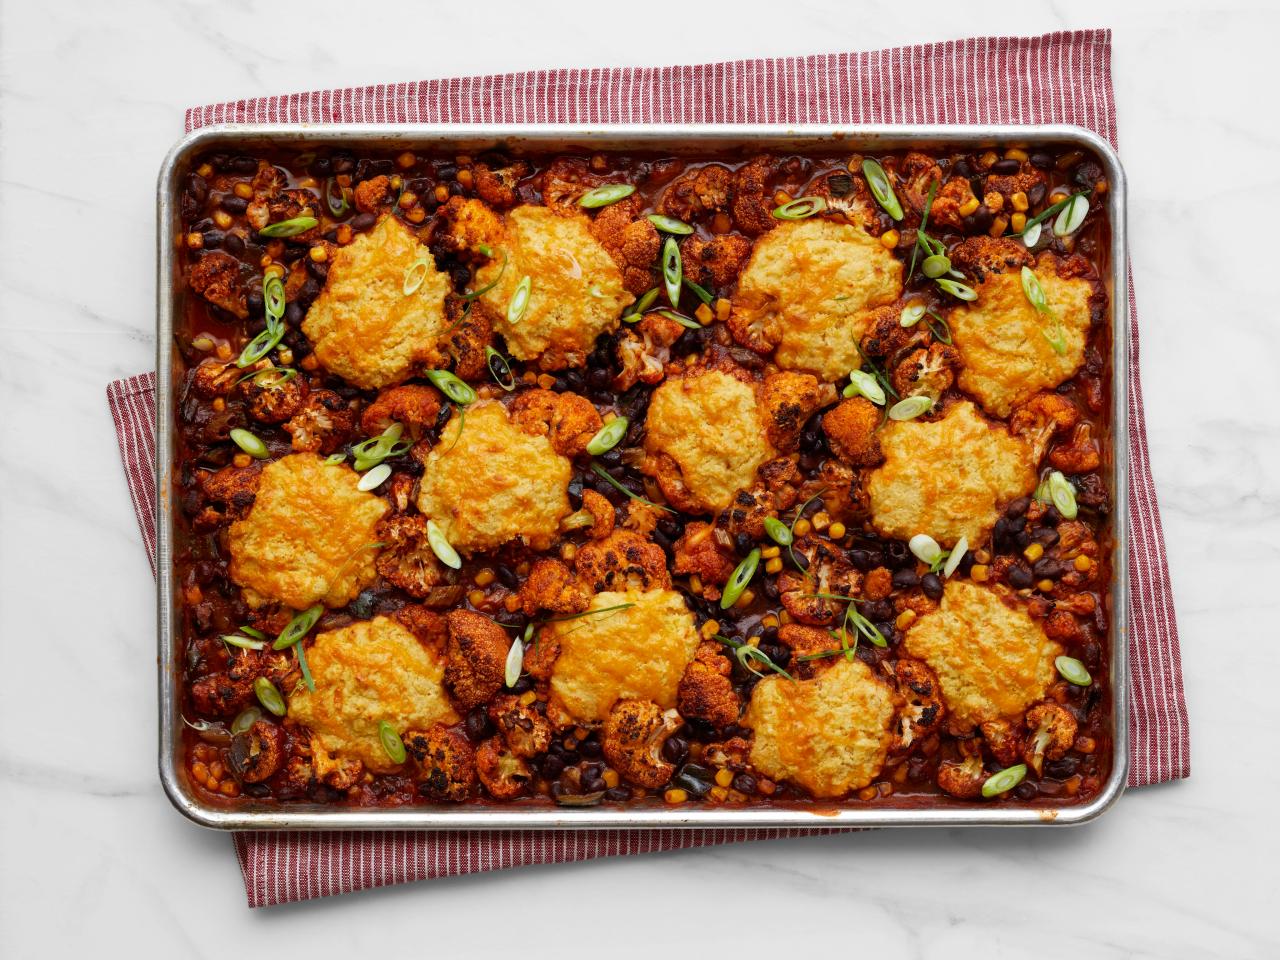 https://food.fnr.sndimg.com/content/dam/images/food/fullset/2017/7/25/0/FNM_090117-Roasted-Vegetable-Chili-with-Cornbread-Biscuits_s4x3.jpg.rend.hgtvcom.1280.960.suffix/1501041581279.jpeg